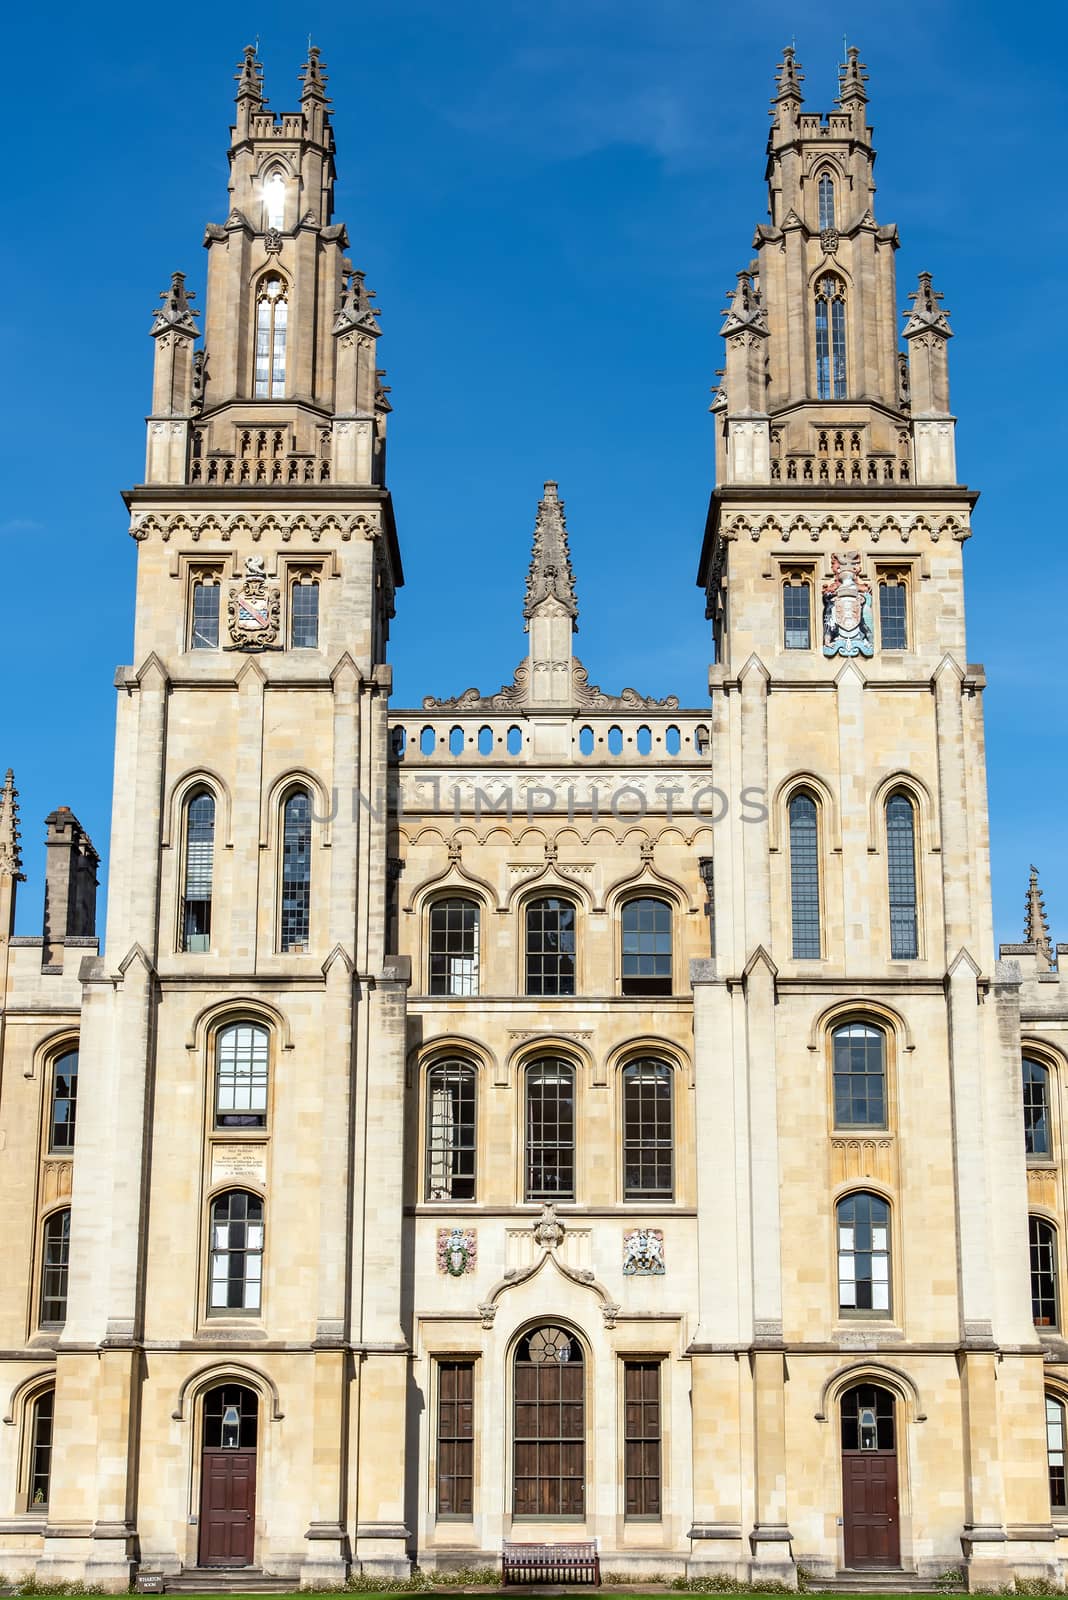 The All Souls College in Oxford, UK